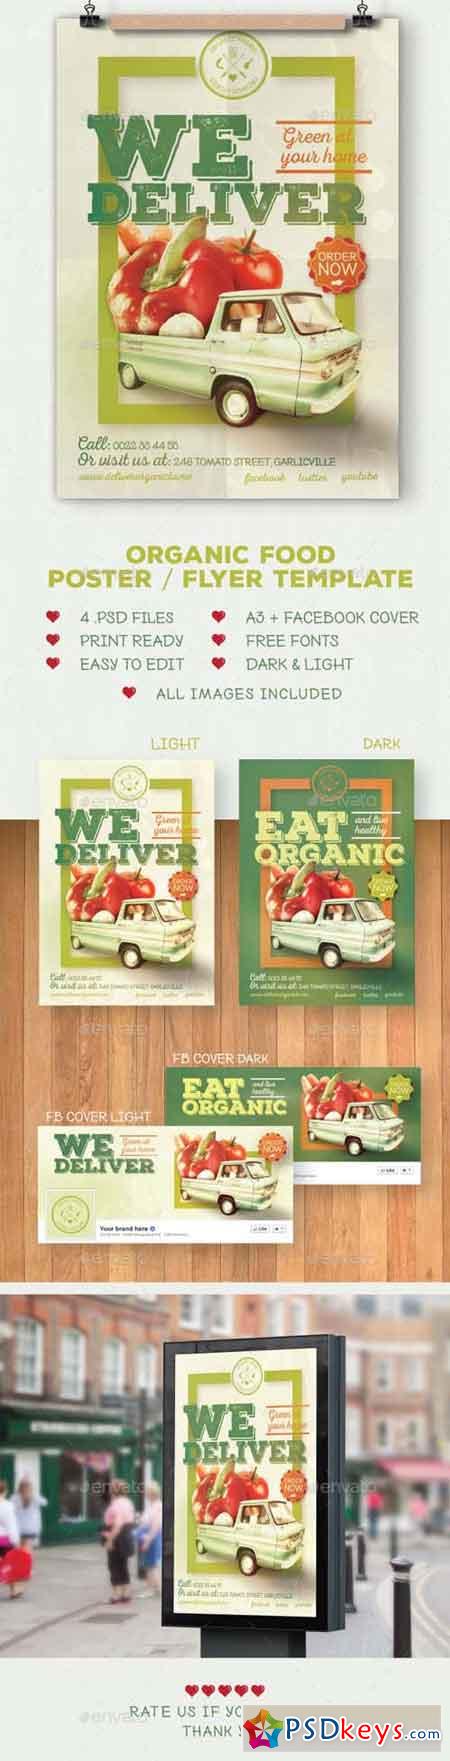 Organic food poster flyer template 14764471